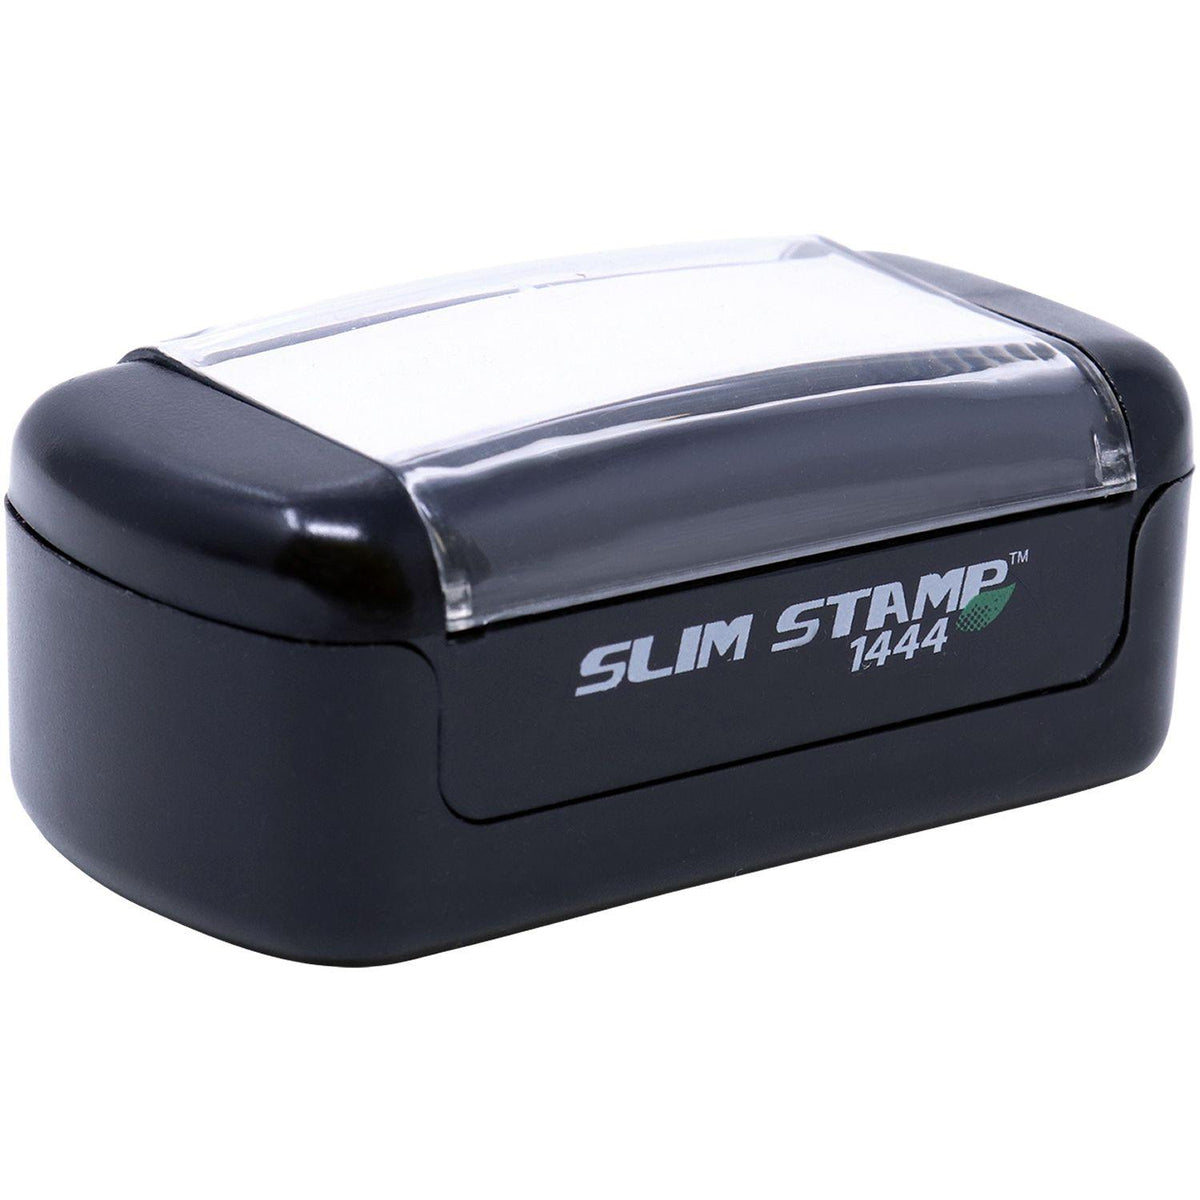 Alt View of Slim Pre Inked Secondary Insurance Stamp Mount Angle